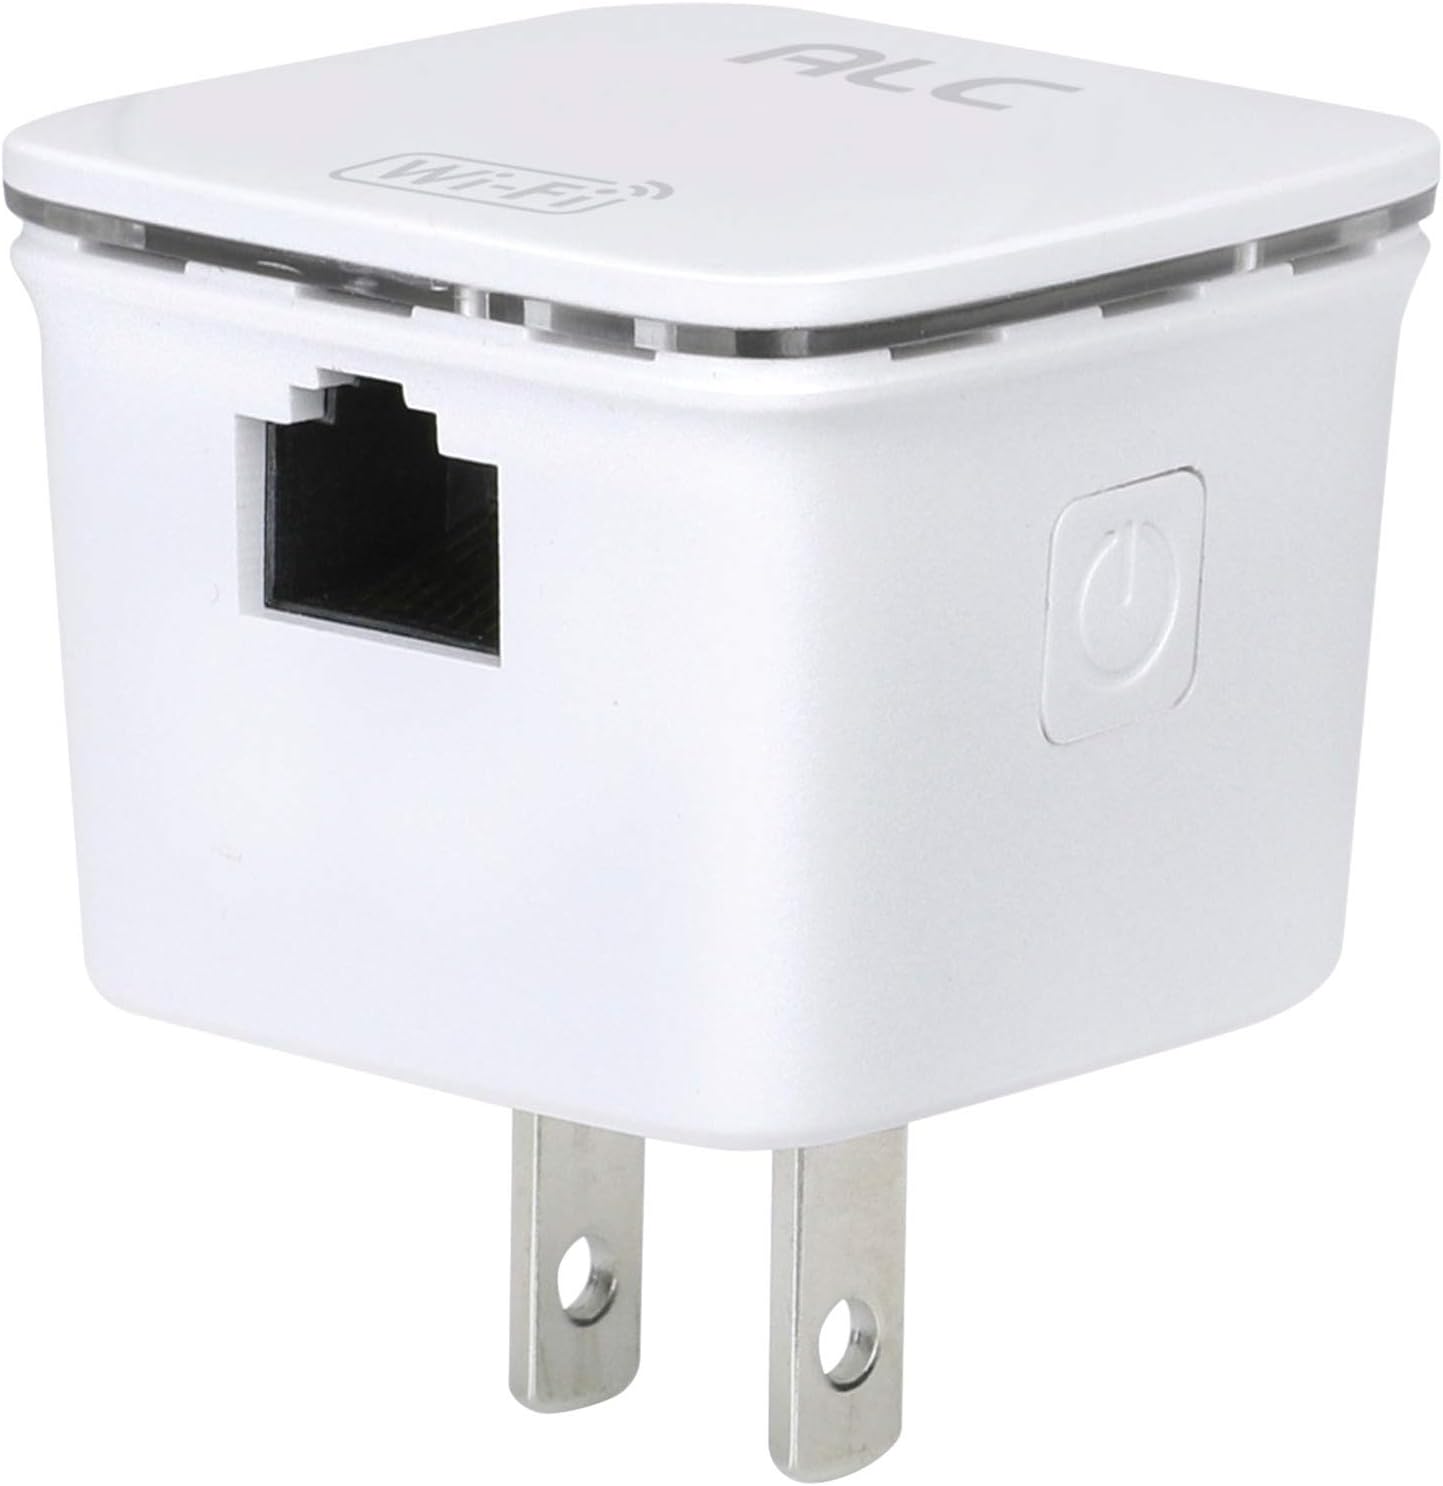 wi-fi-repeater-amr300n-new-white-2